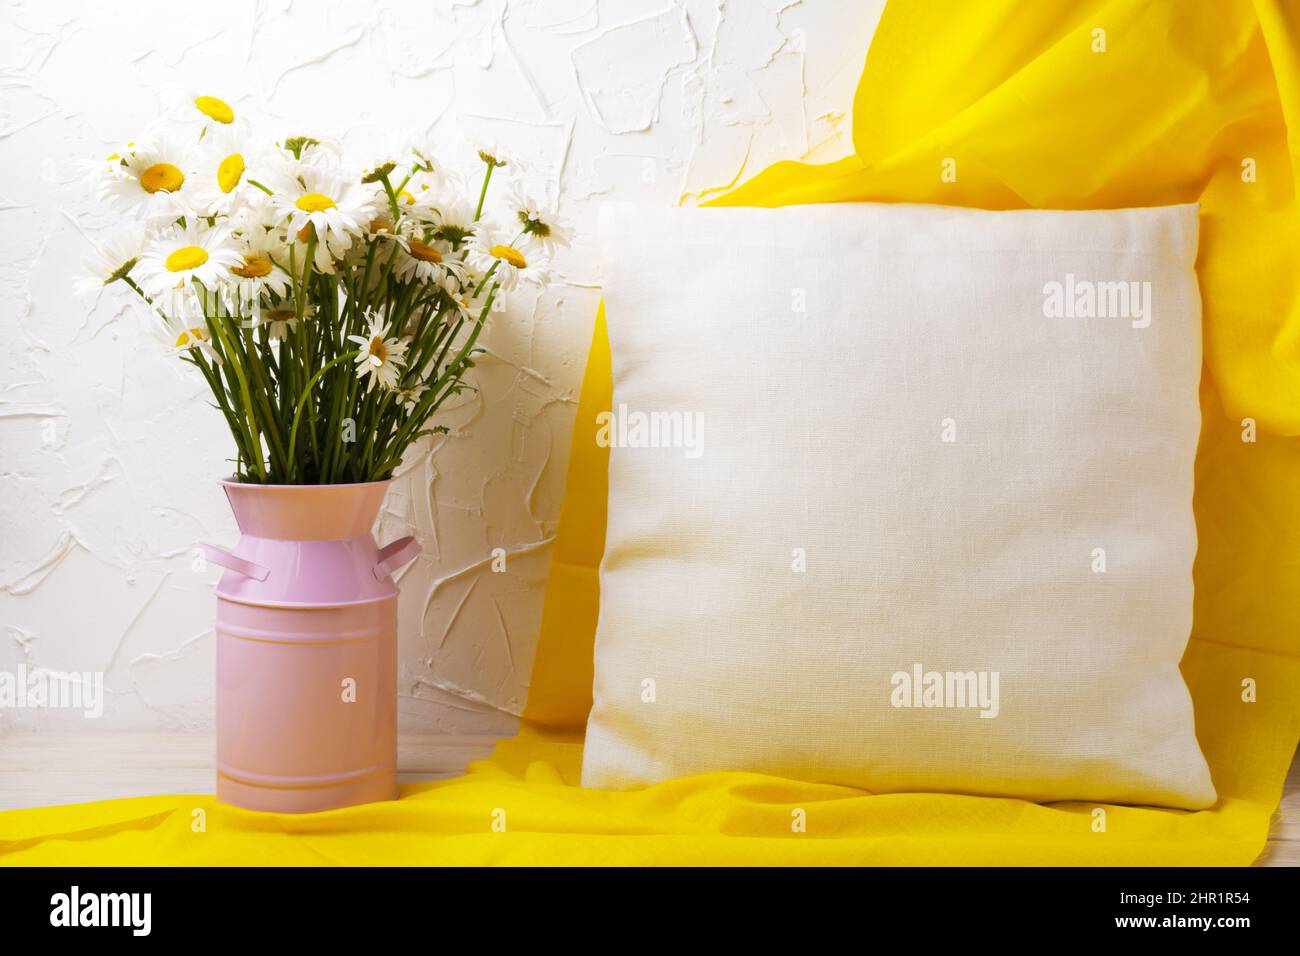 Square cotton pillow mockup with wild daisy flowers in the pink can and yellow scarf. Rustic linen pillowcase mock up for design presentation Stock Photo